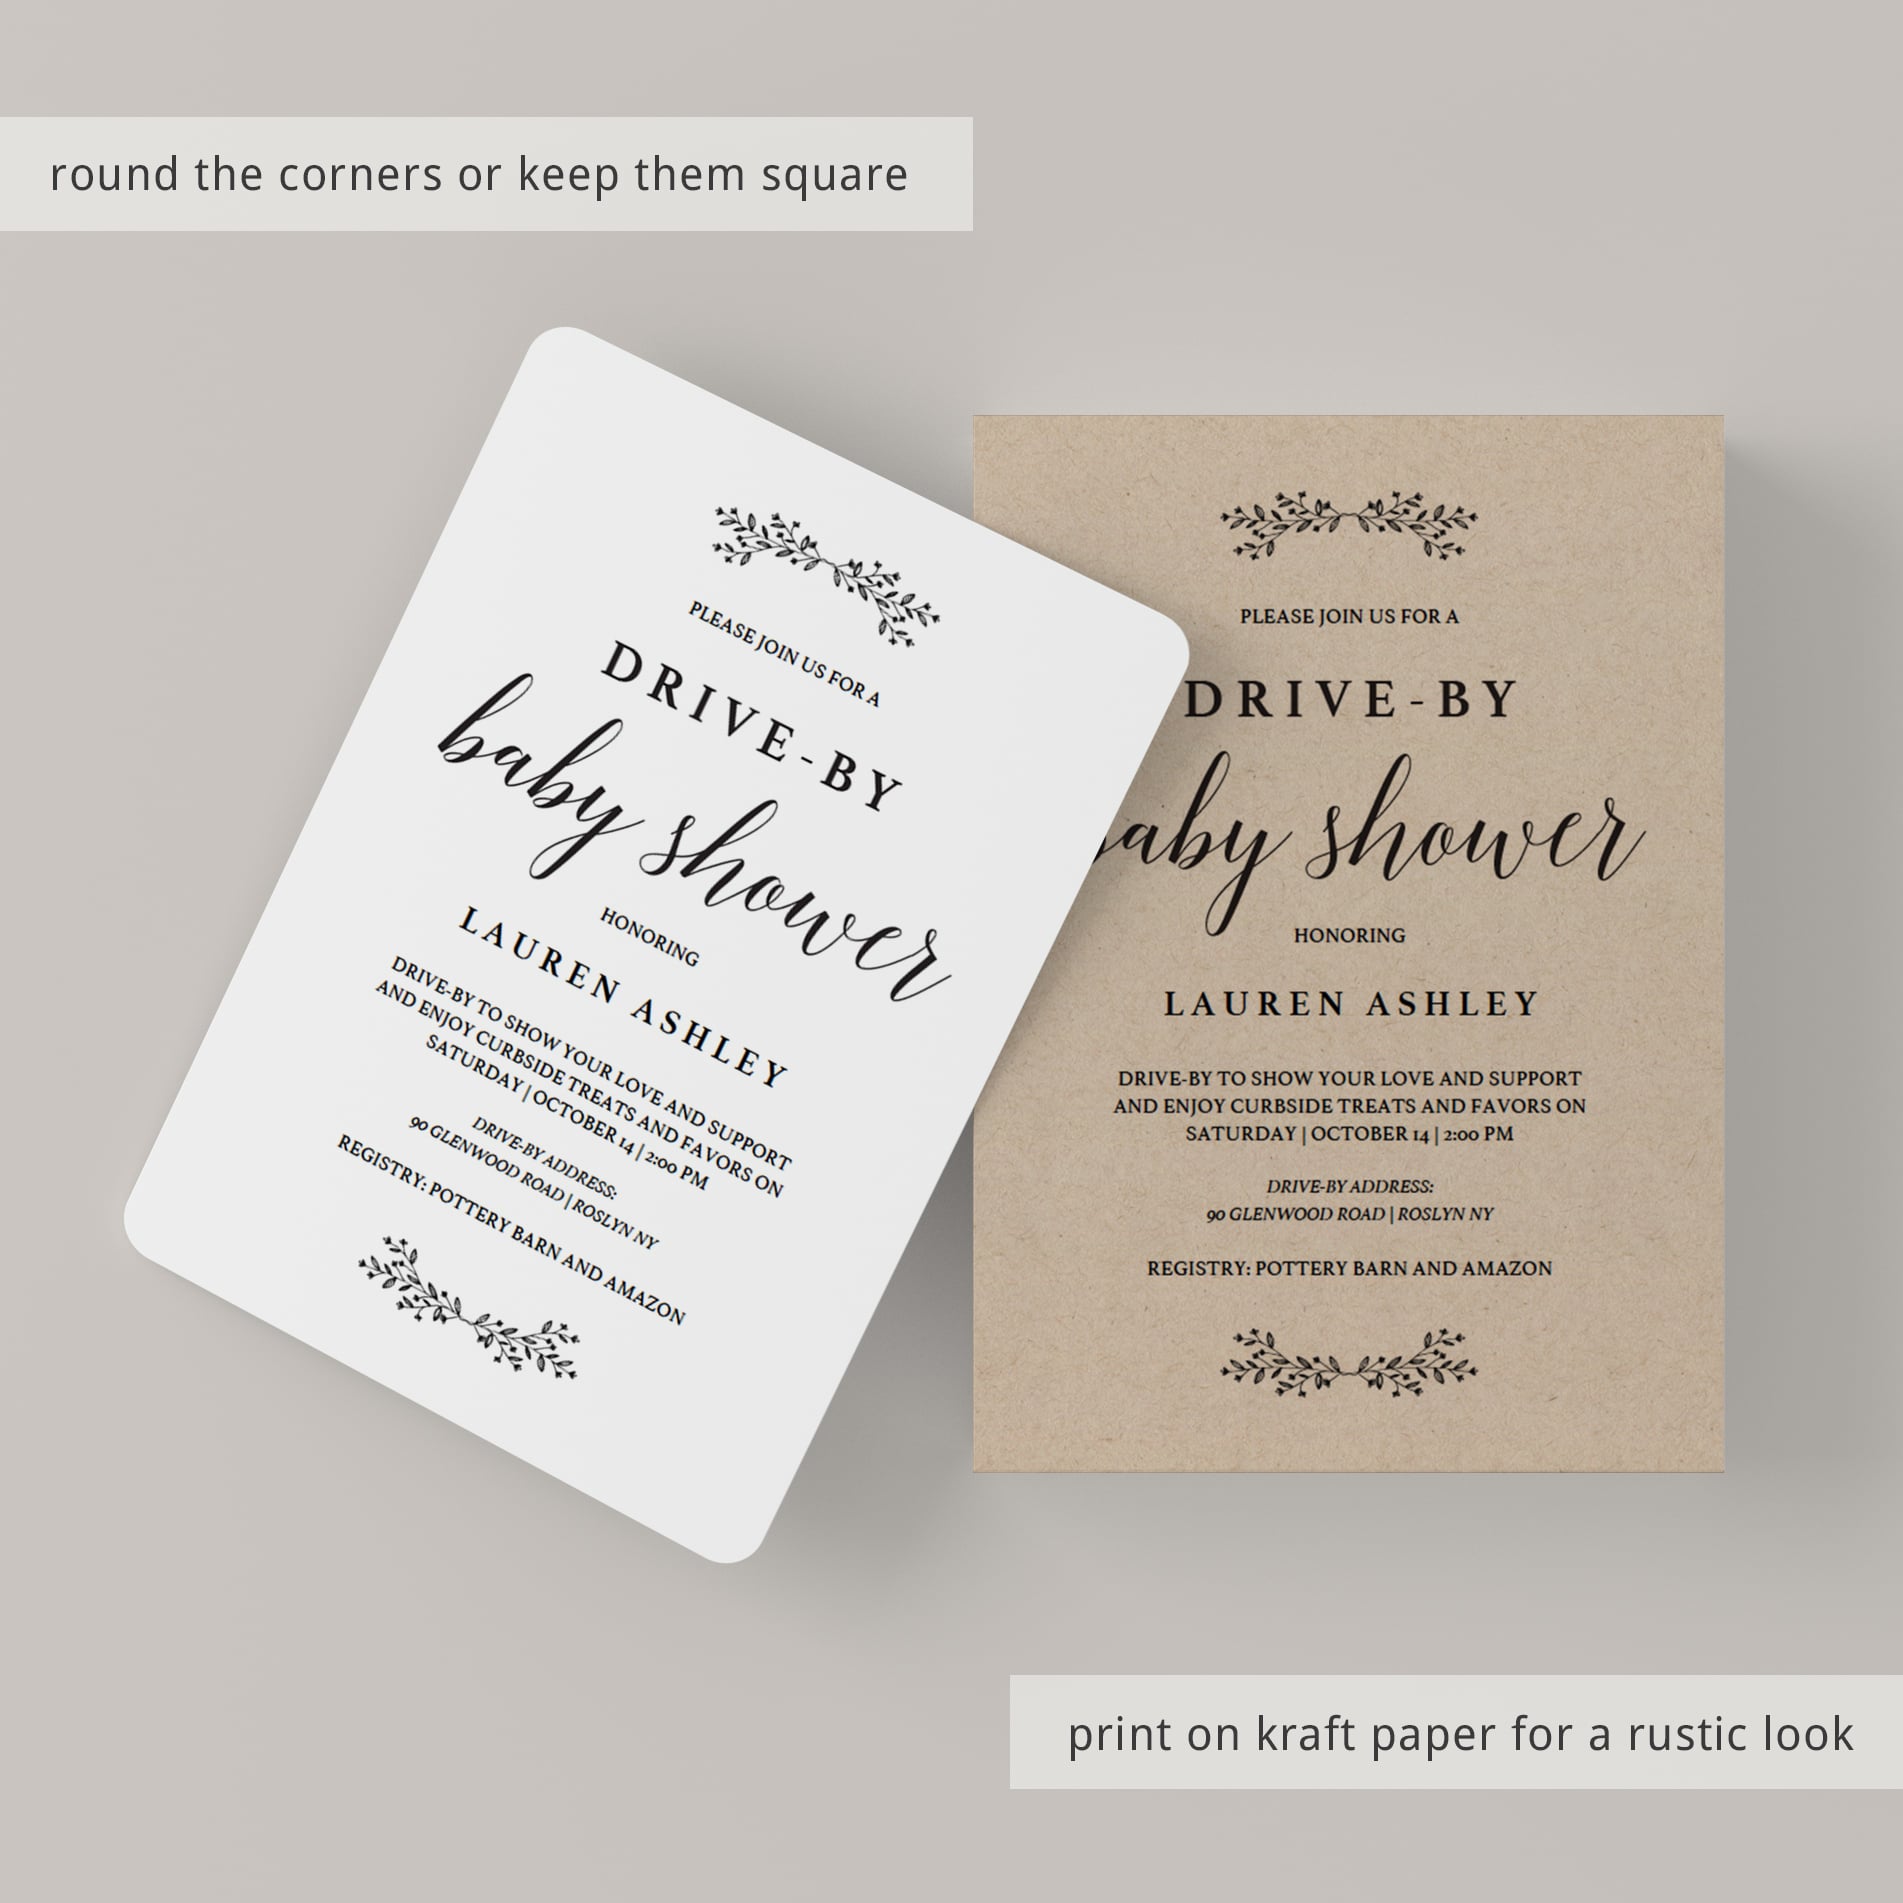 Social distancing baby shower ideas invitation template by LittleSizzle